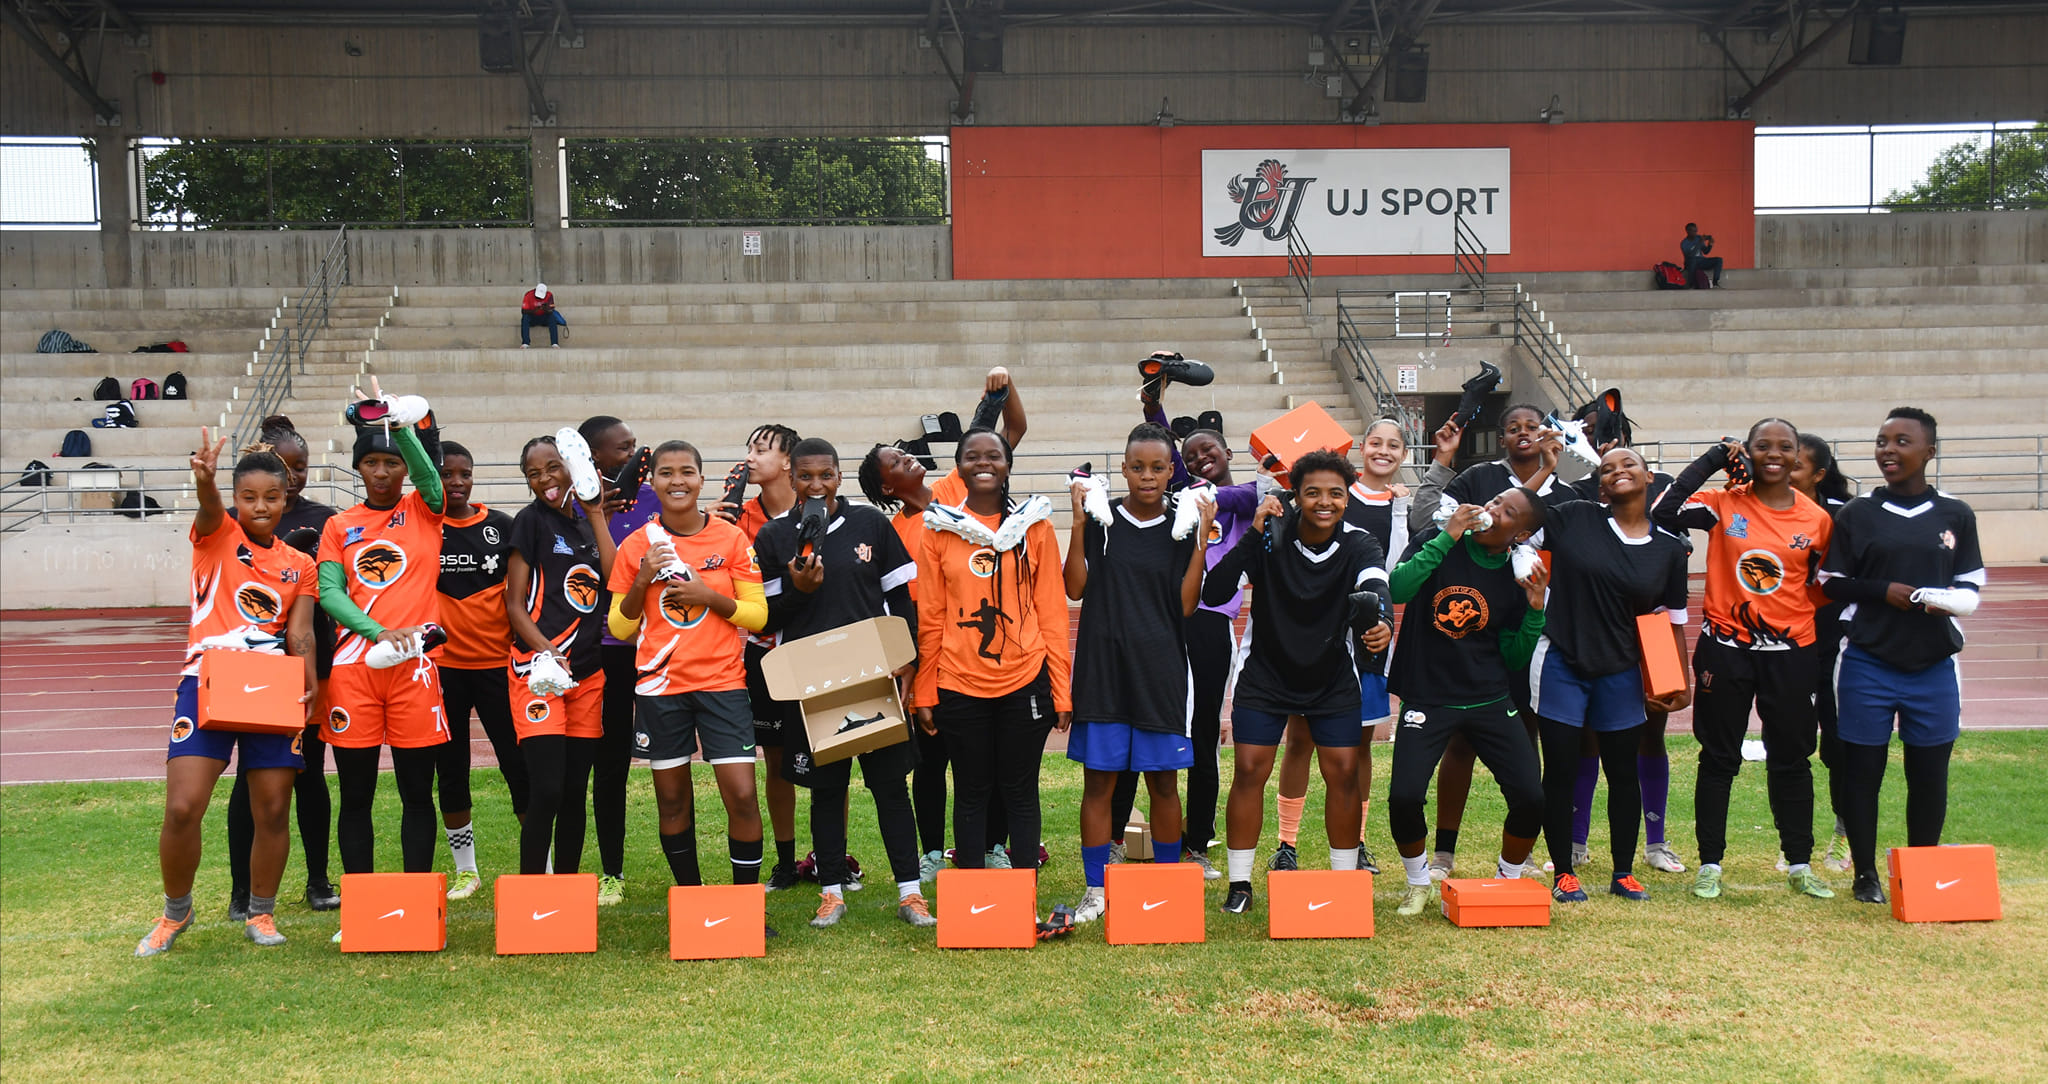 The UJ senior women's squad received a pair of soccer boots each from former UJ player and student, Thembi Kgatlana's Foundation, two days before heading to Durban for their league opening match against the Durban Ladies FC on Saturday, 04 February 2023.